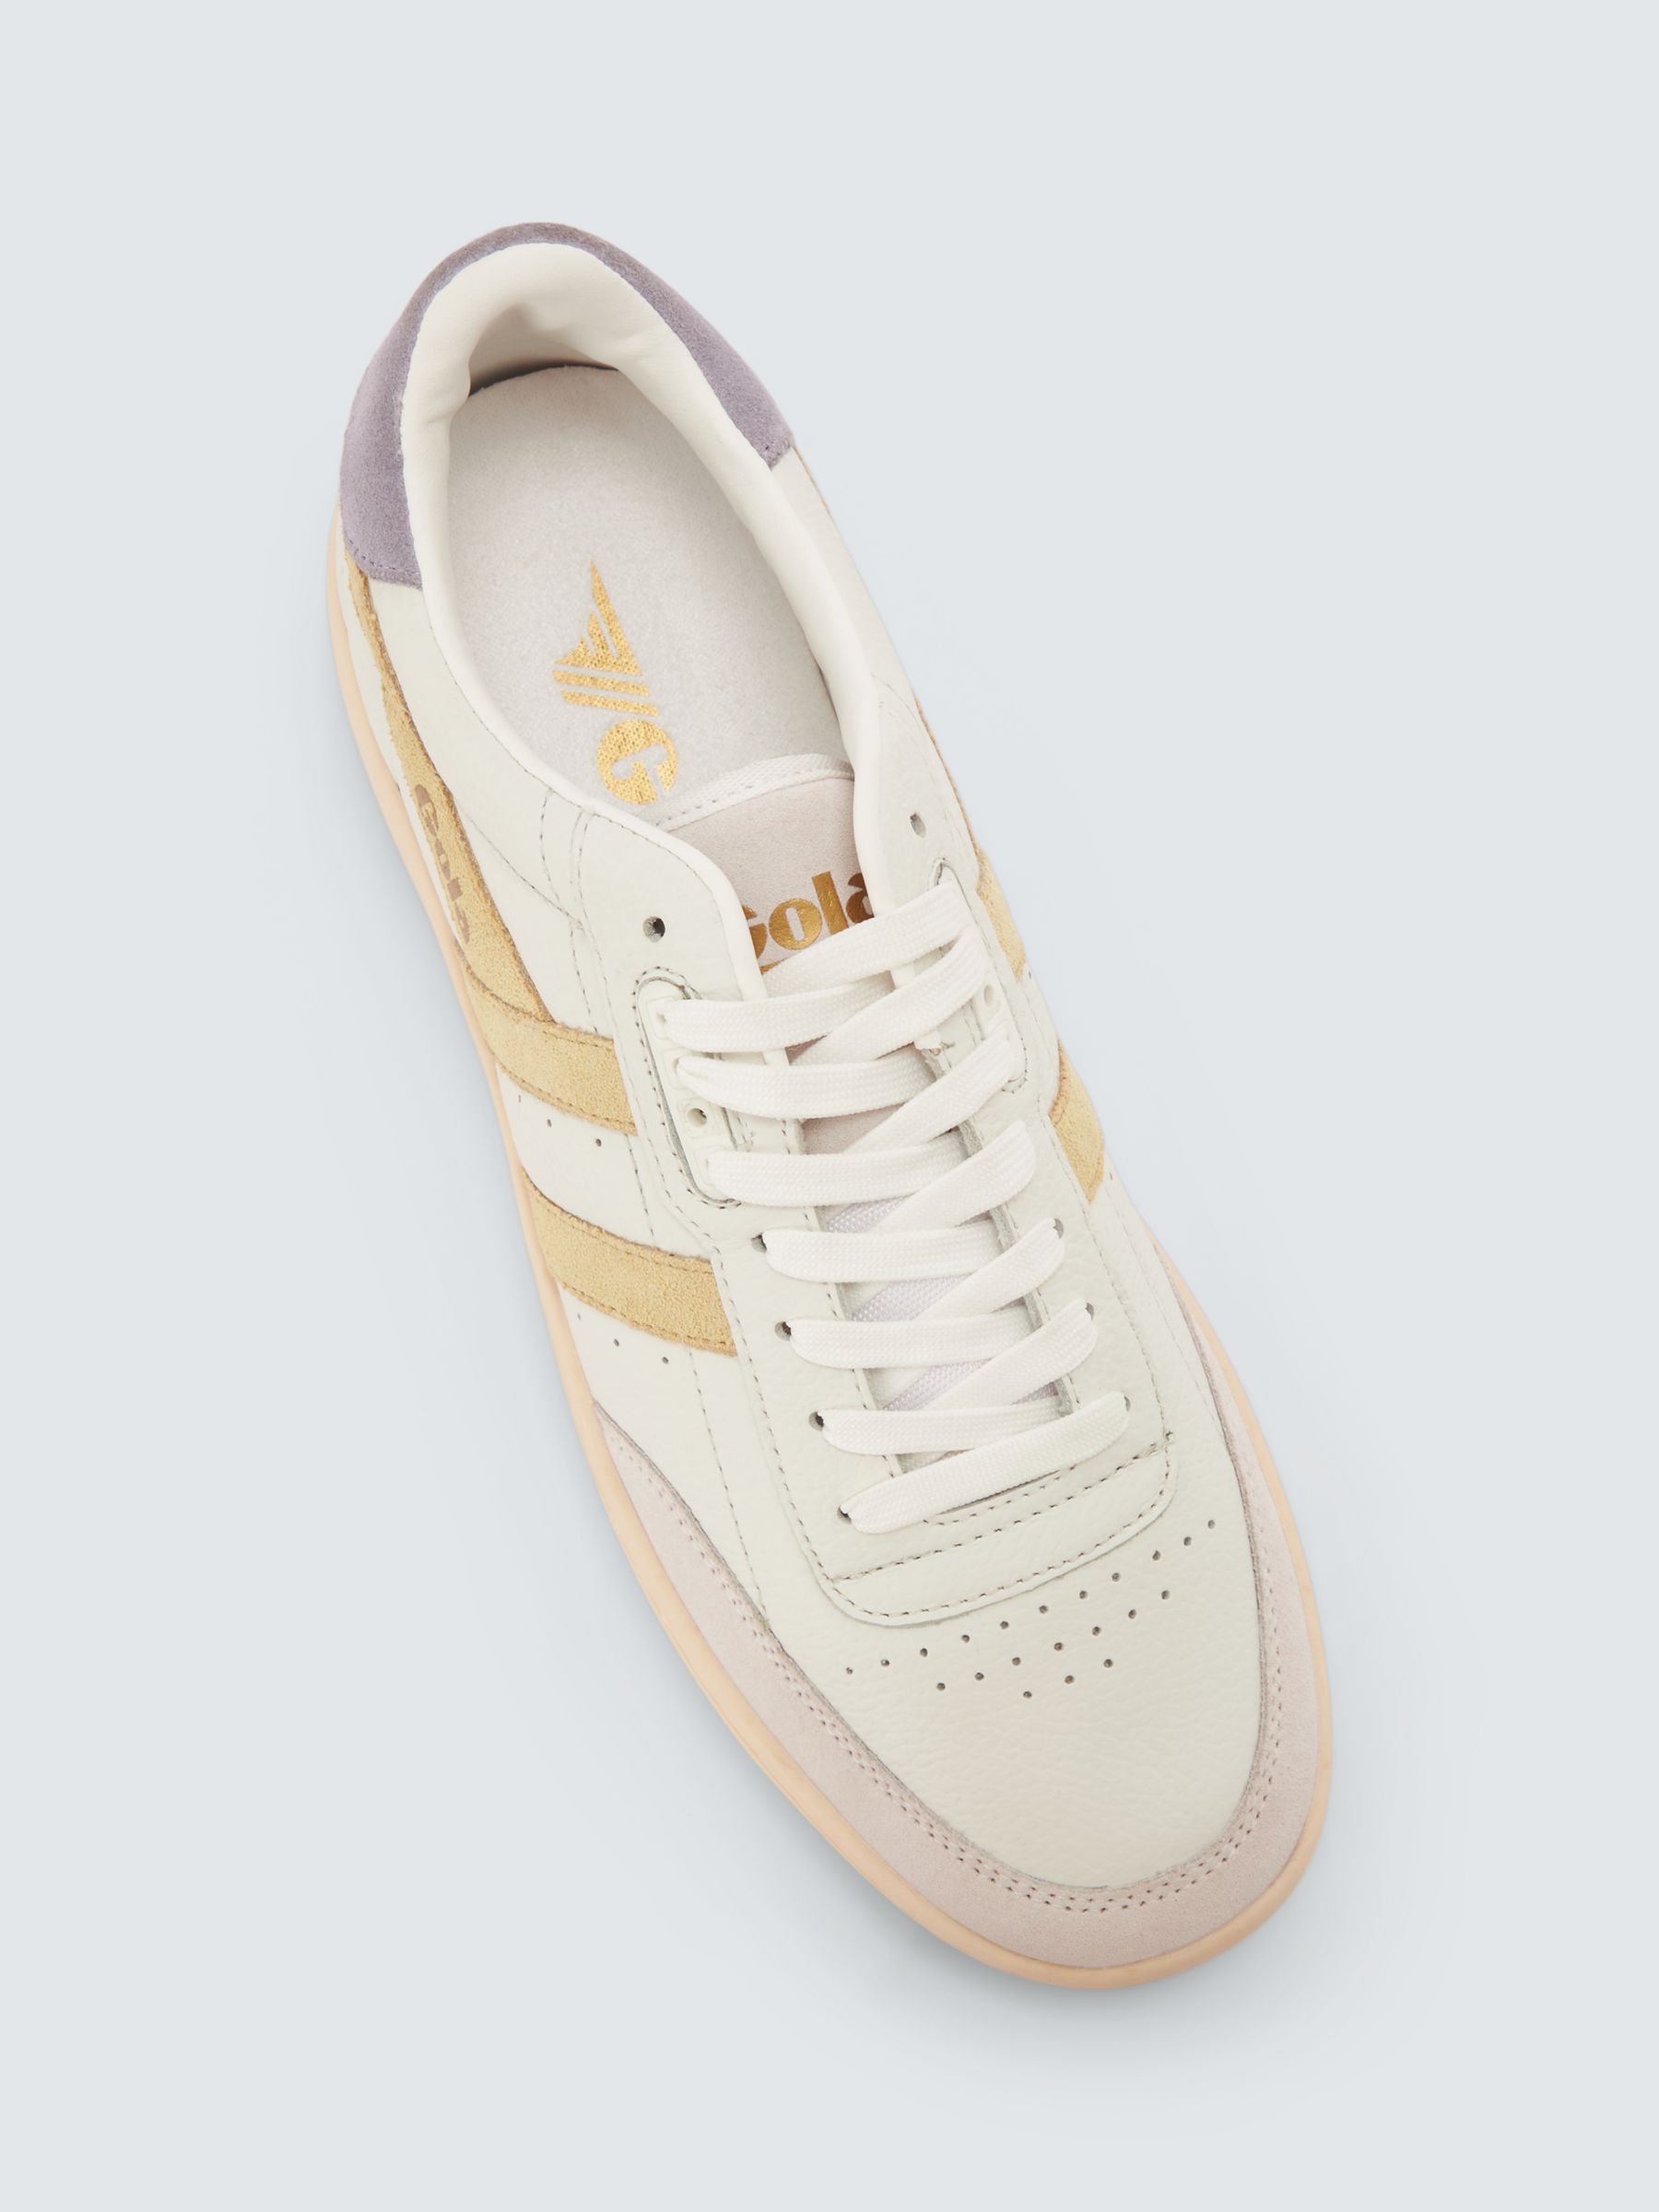 Buy Gola Falcon Leather Trainers Online at johnlewis.com